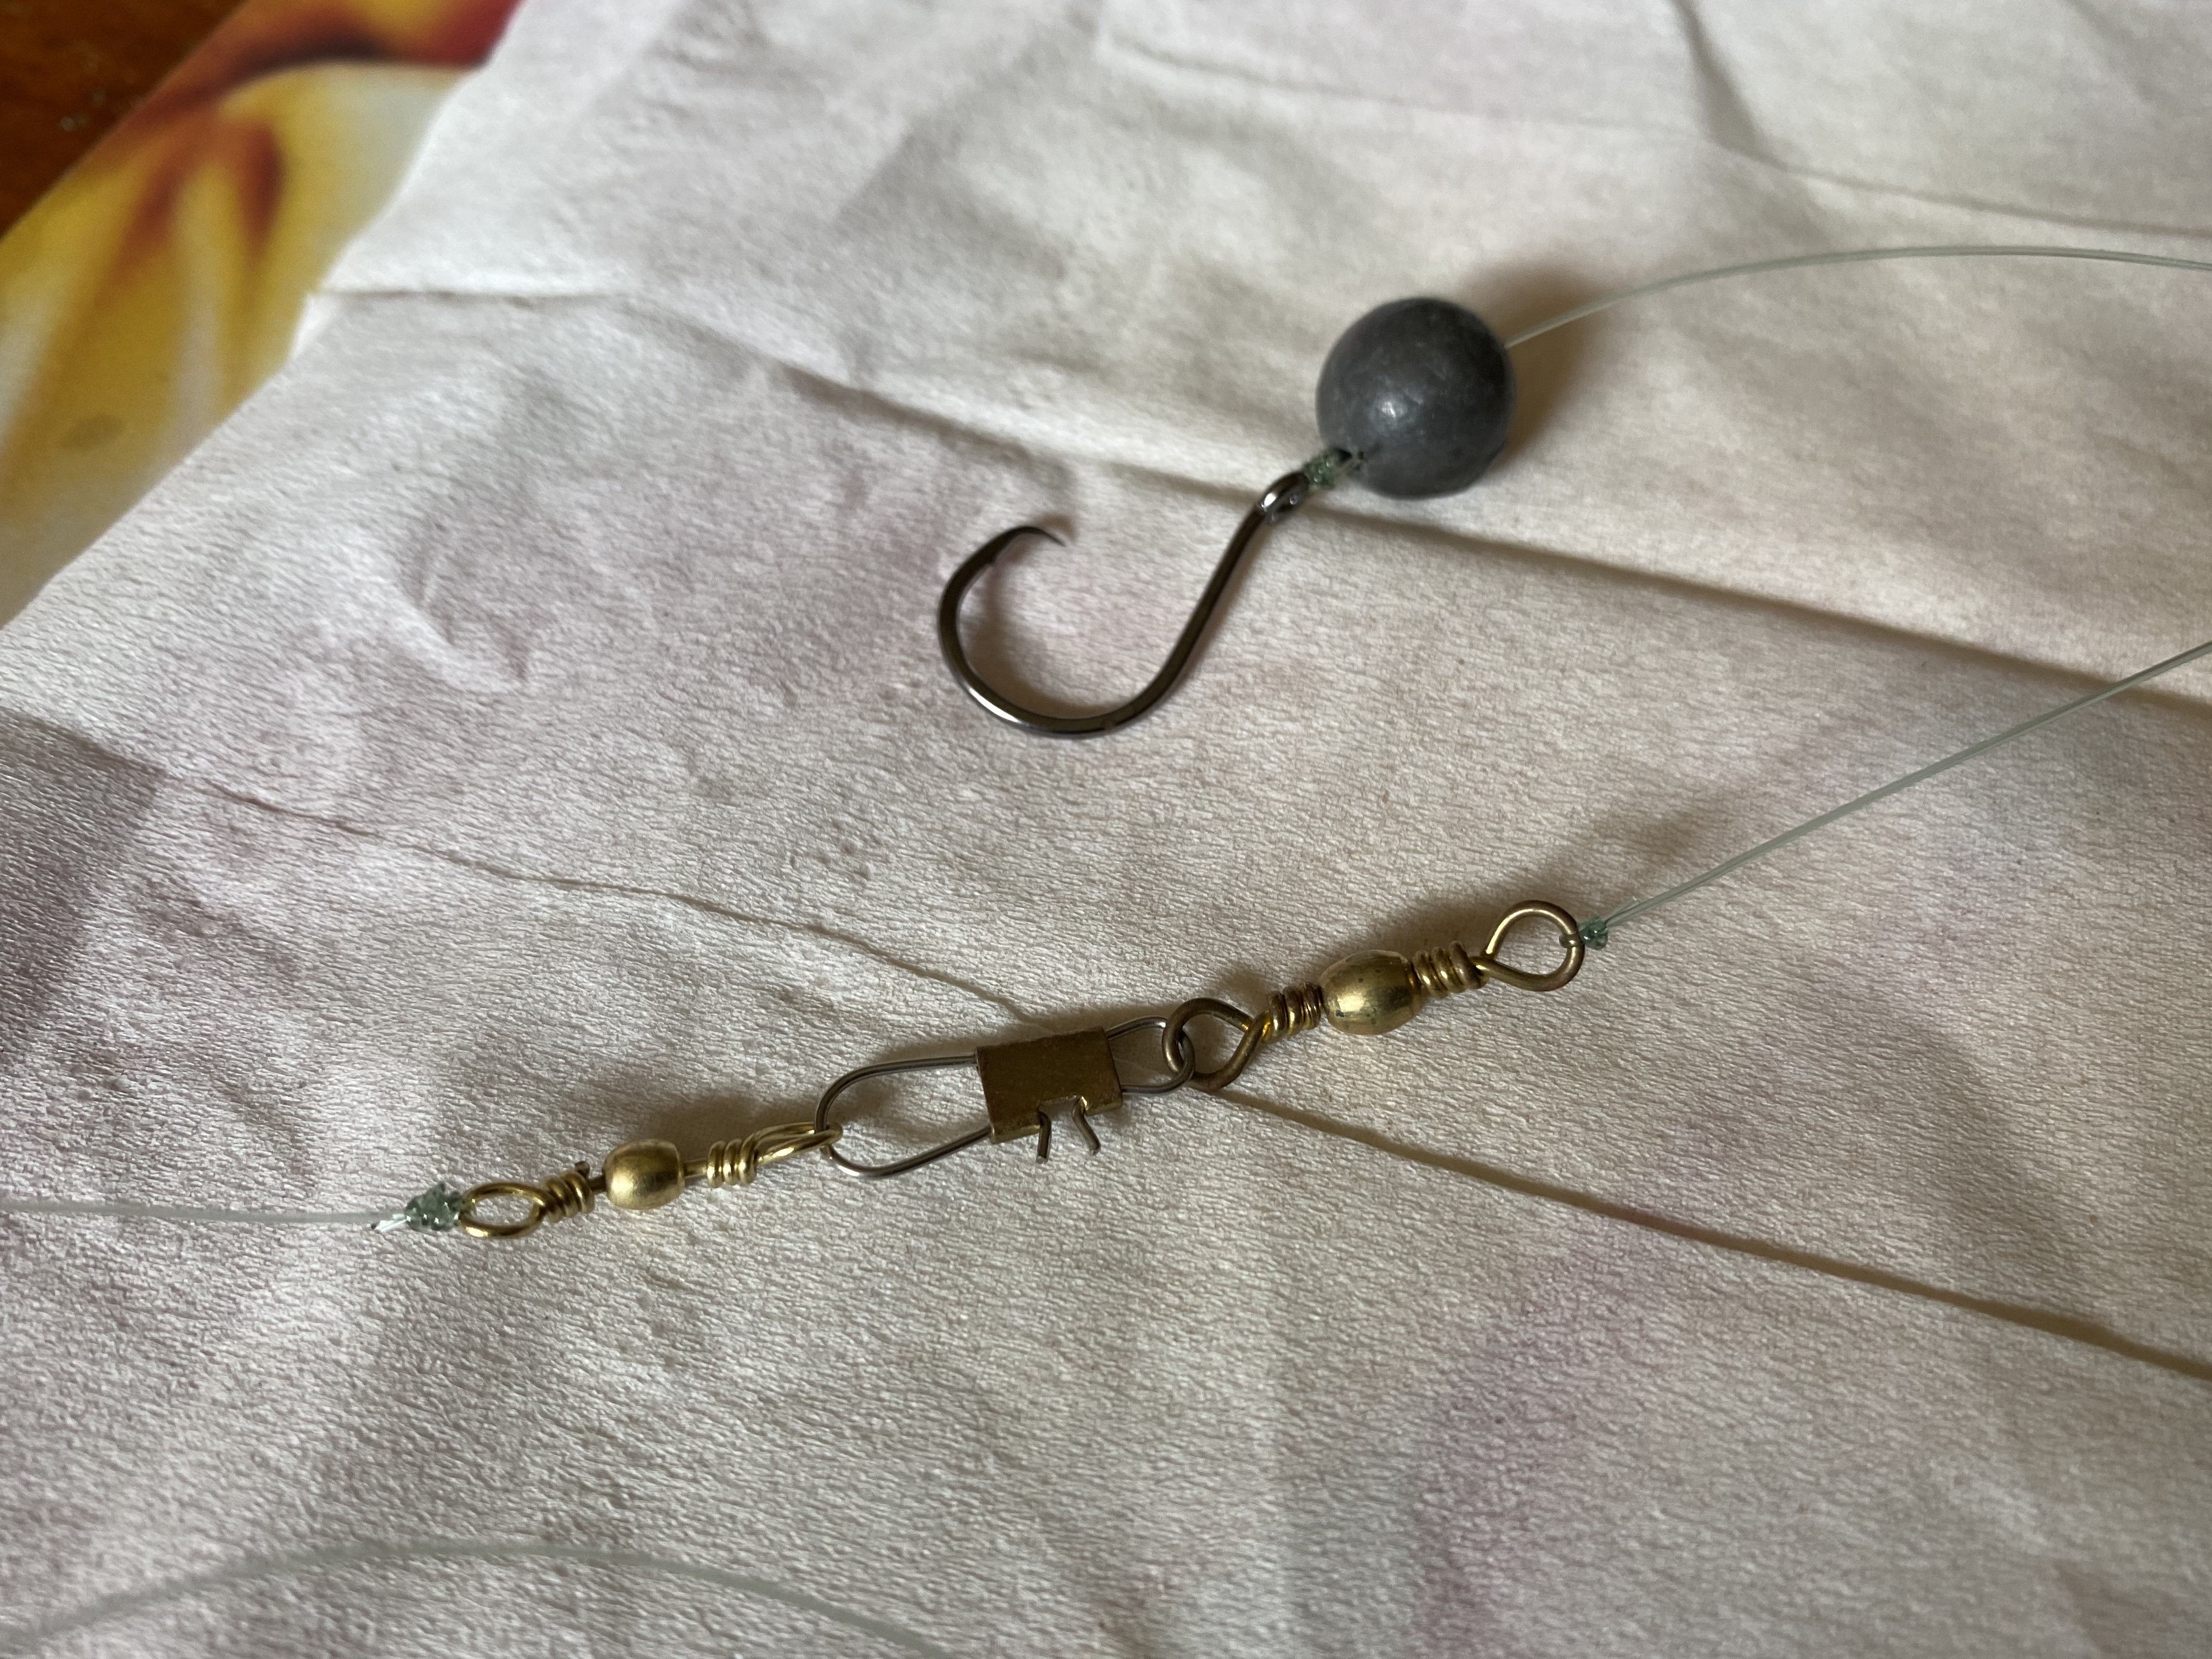 Snap swivels for leaders - Fishing Chat - DECKEE Community